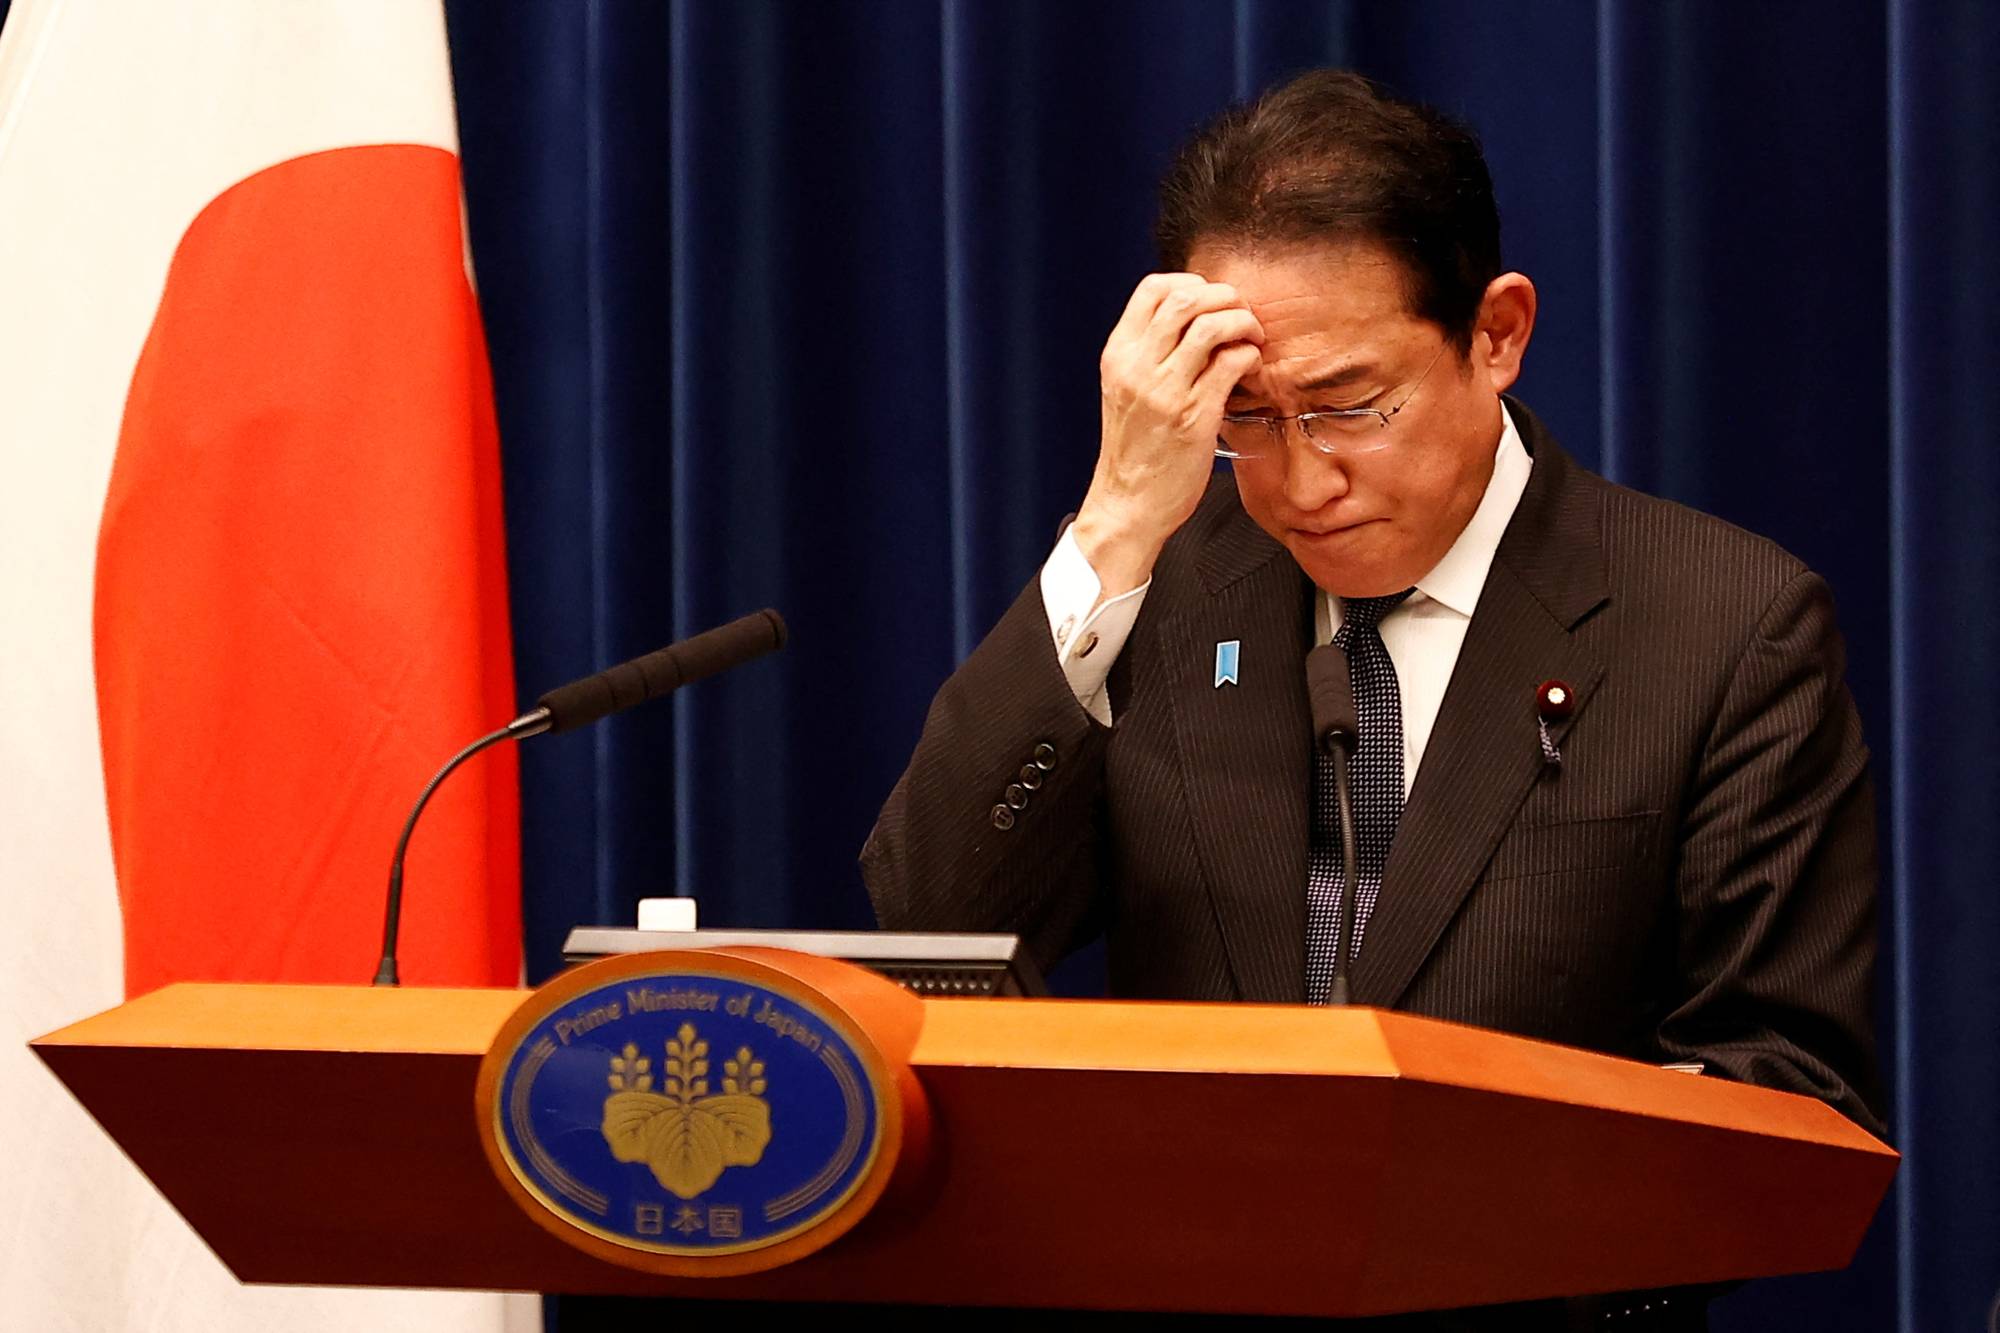 Prime Minister Fumio Kishida listens to questions from the media during a news conference at the Prime Minister's Office in Tokyo on Tuesday.   | POOL / VIA REUTERS